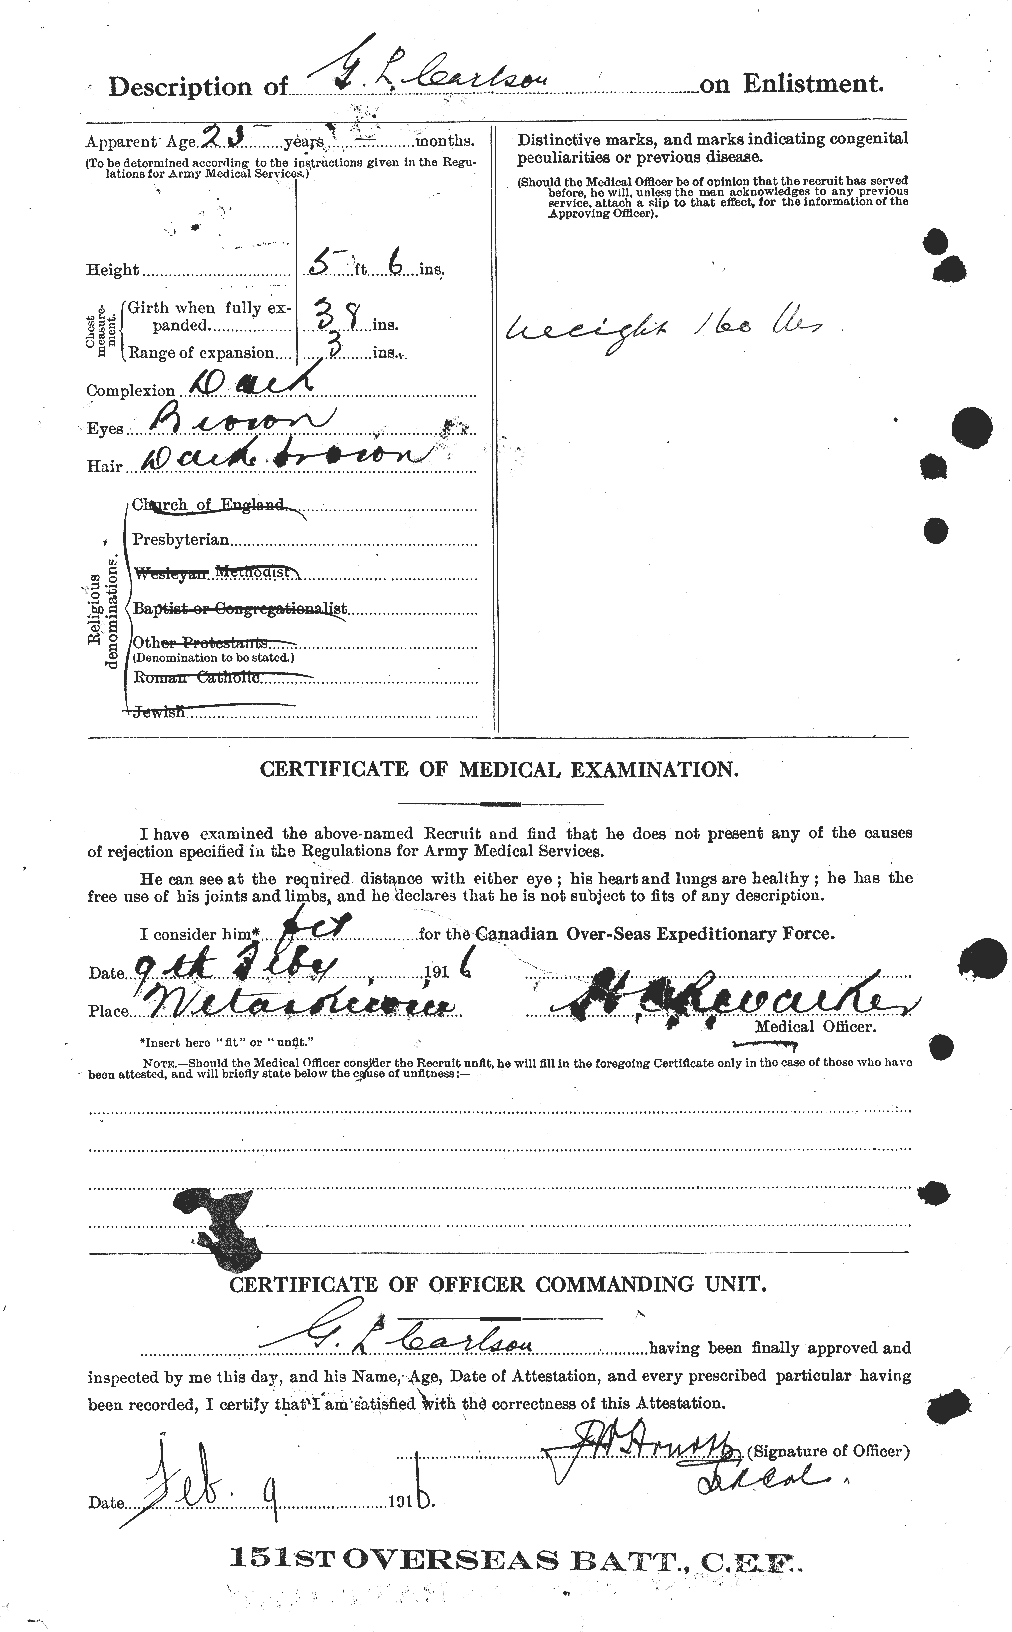 Personnel Records of the First World War - CEF 004552b